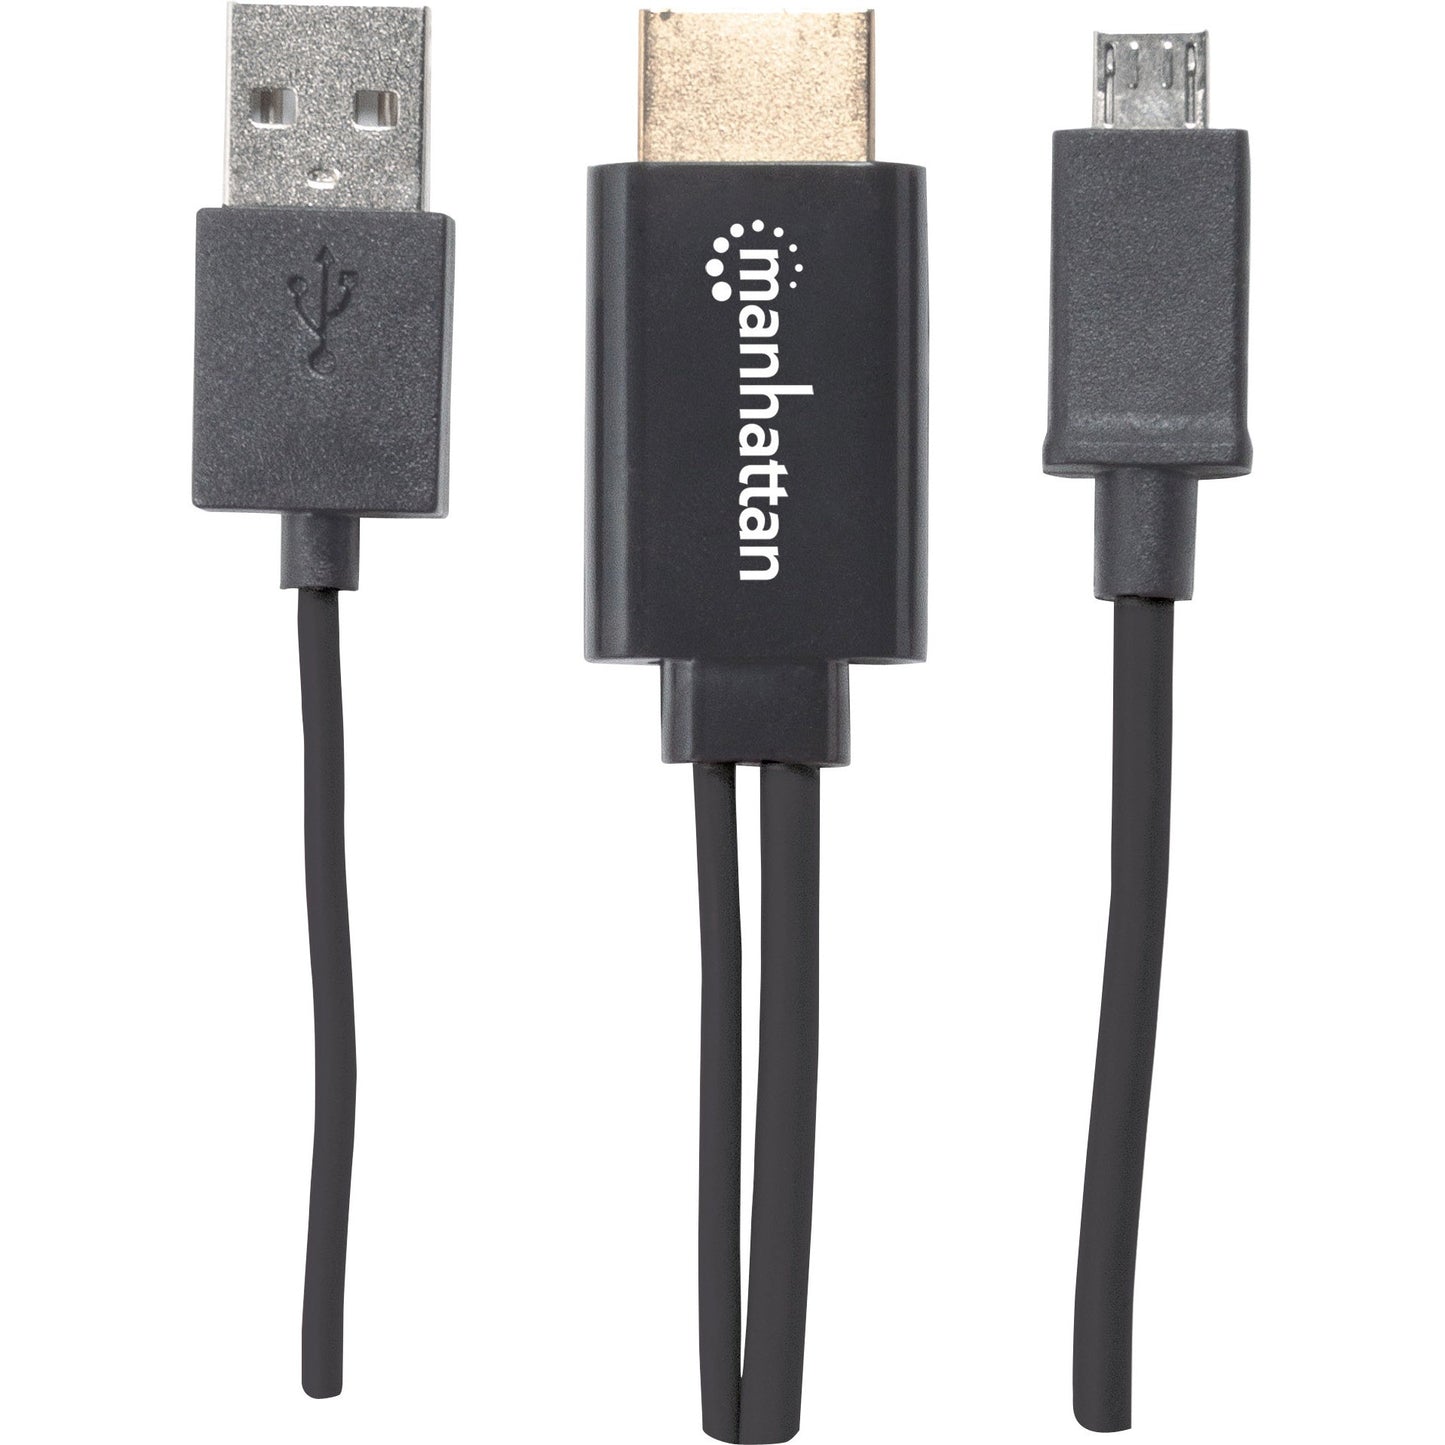 Manhattan Micro-USB 5-pin to HDMI, with USB type-A power